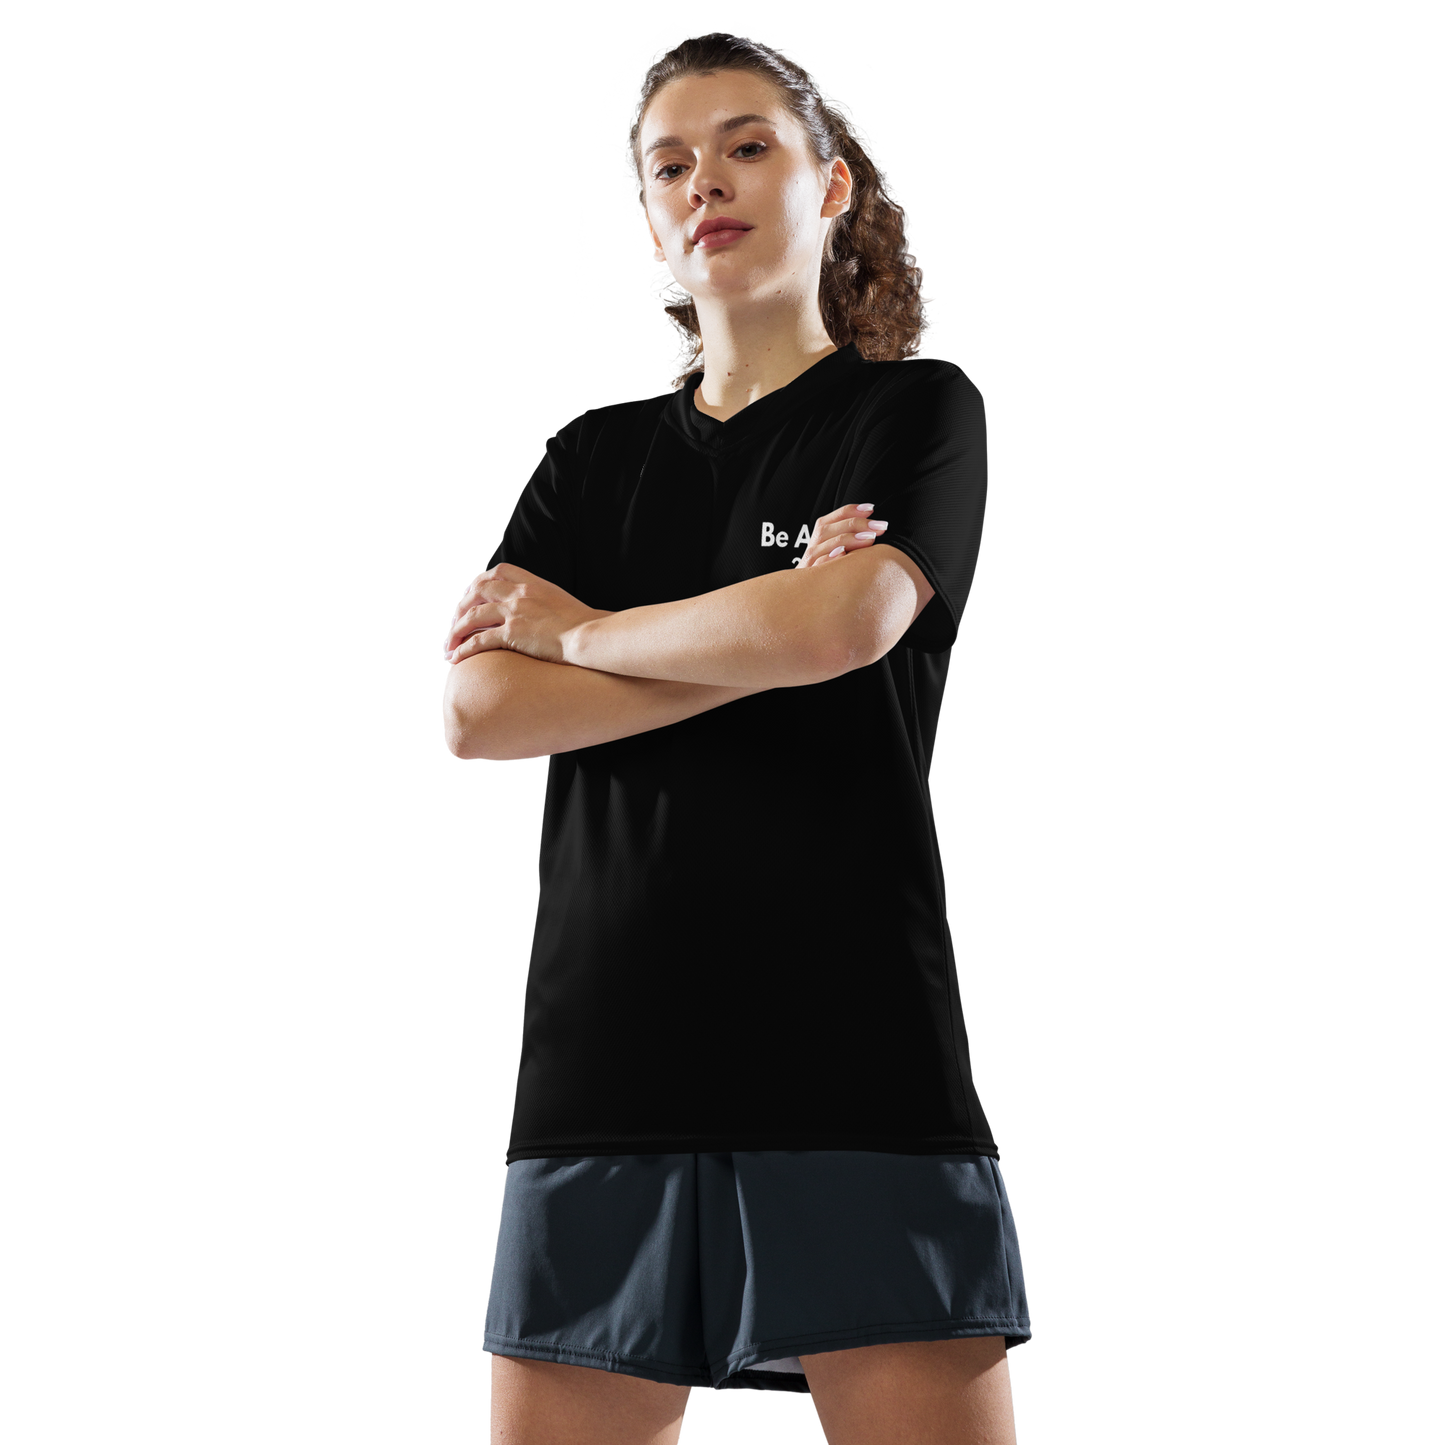 Be Active Workout tee